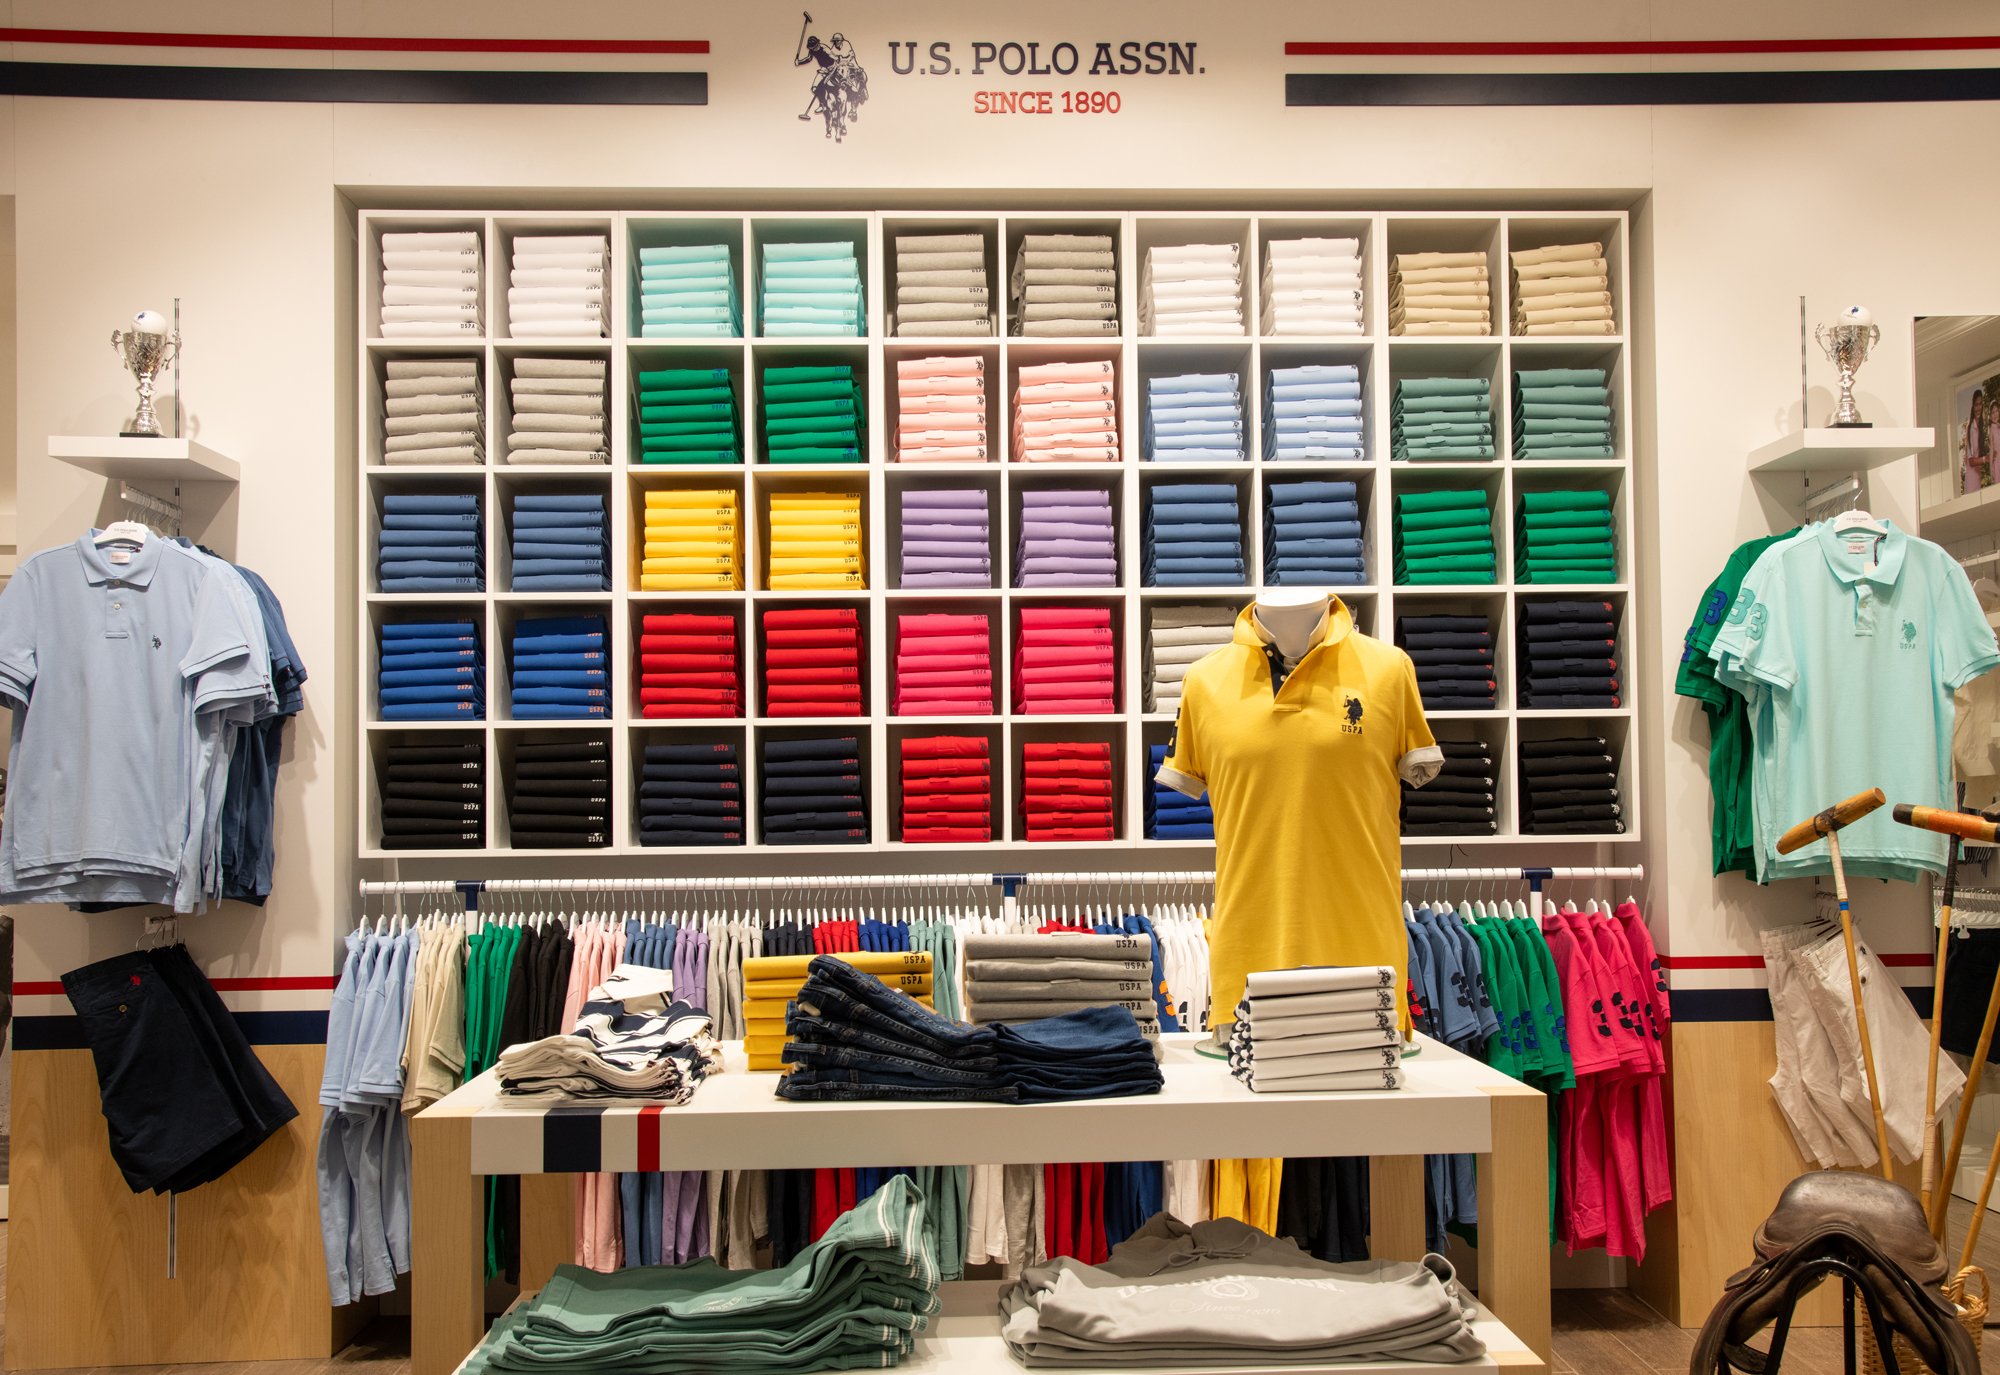 U.S. Polo Assn. East Midlands Store 2.png